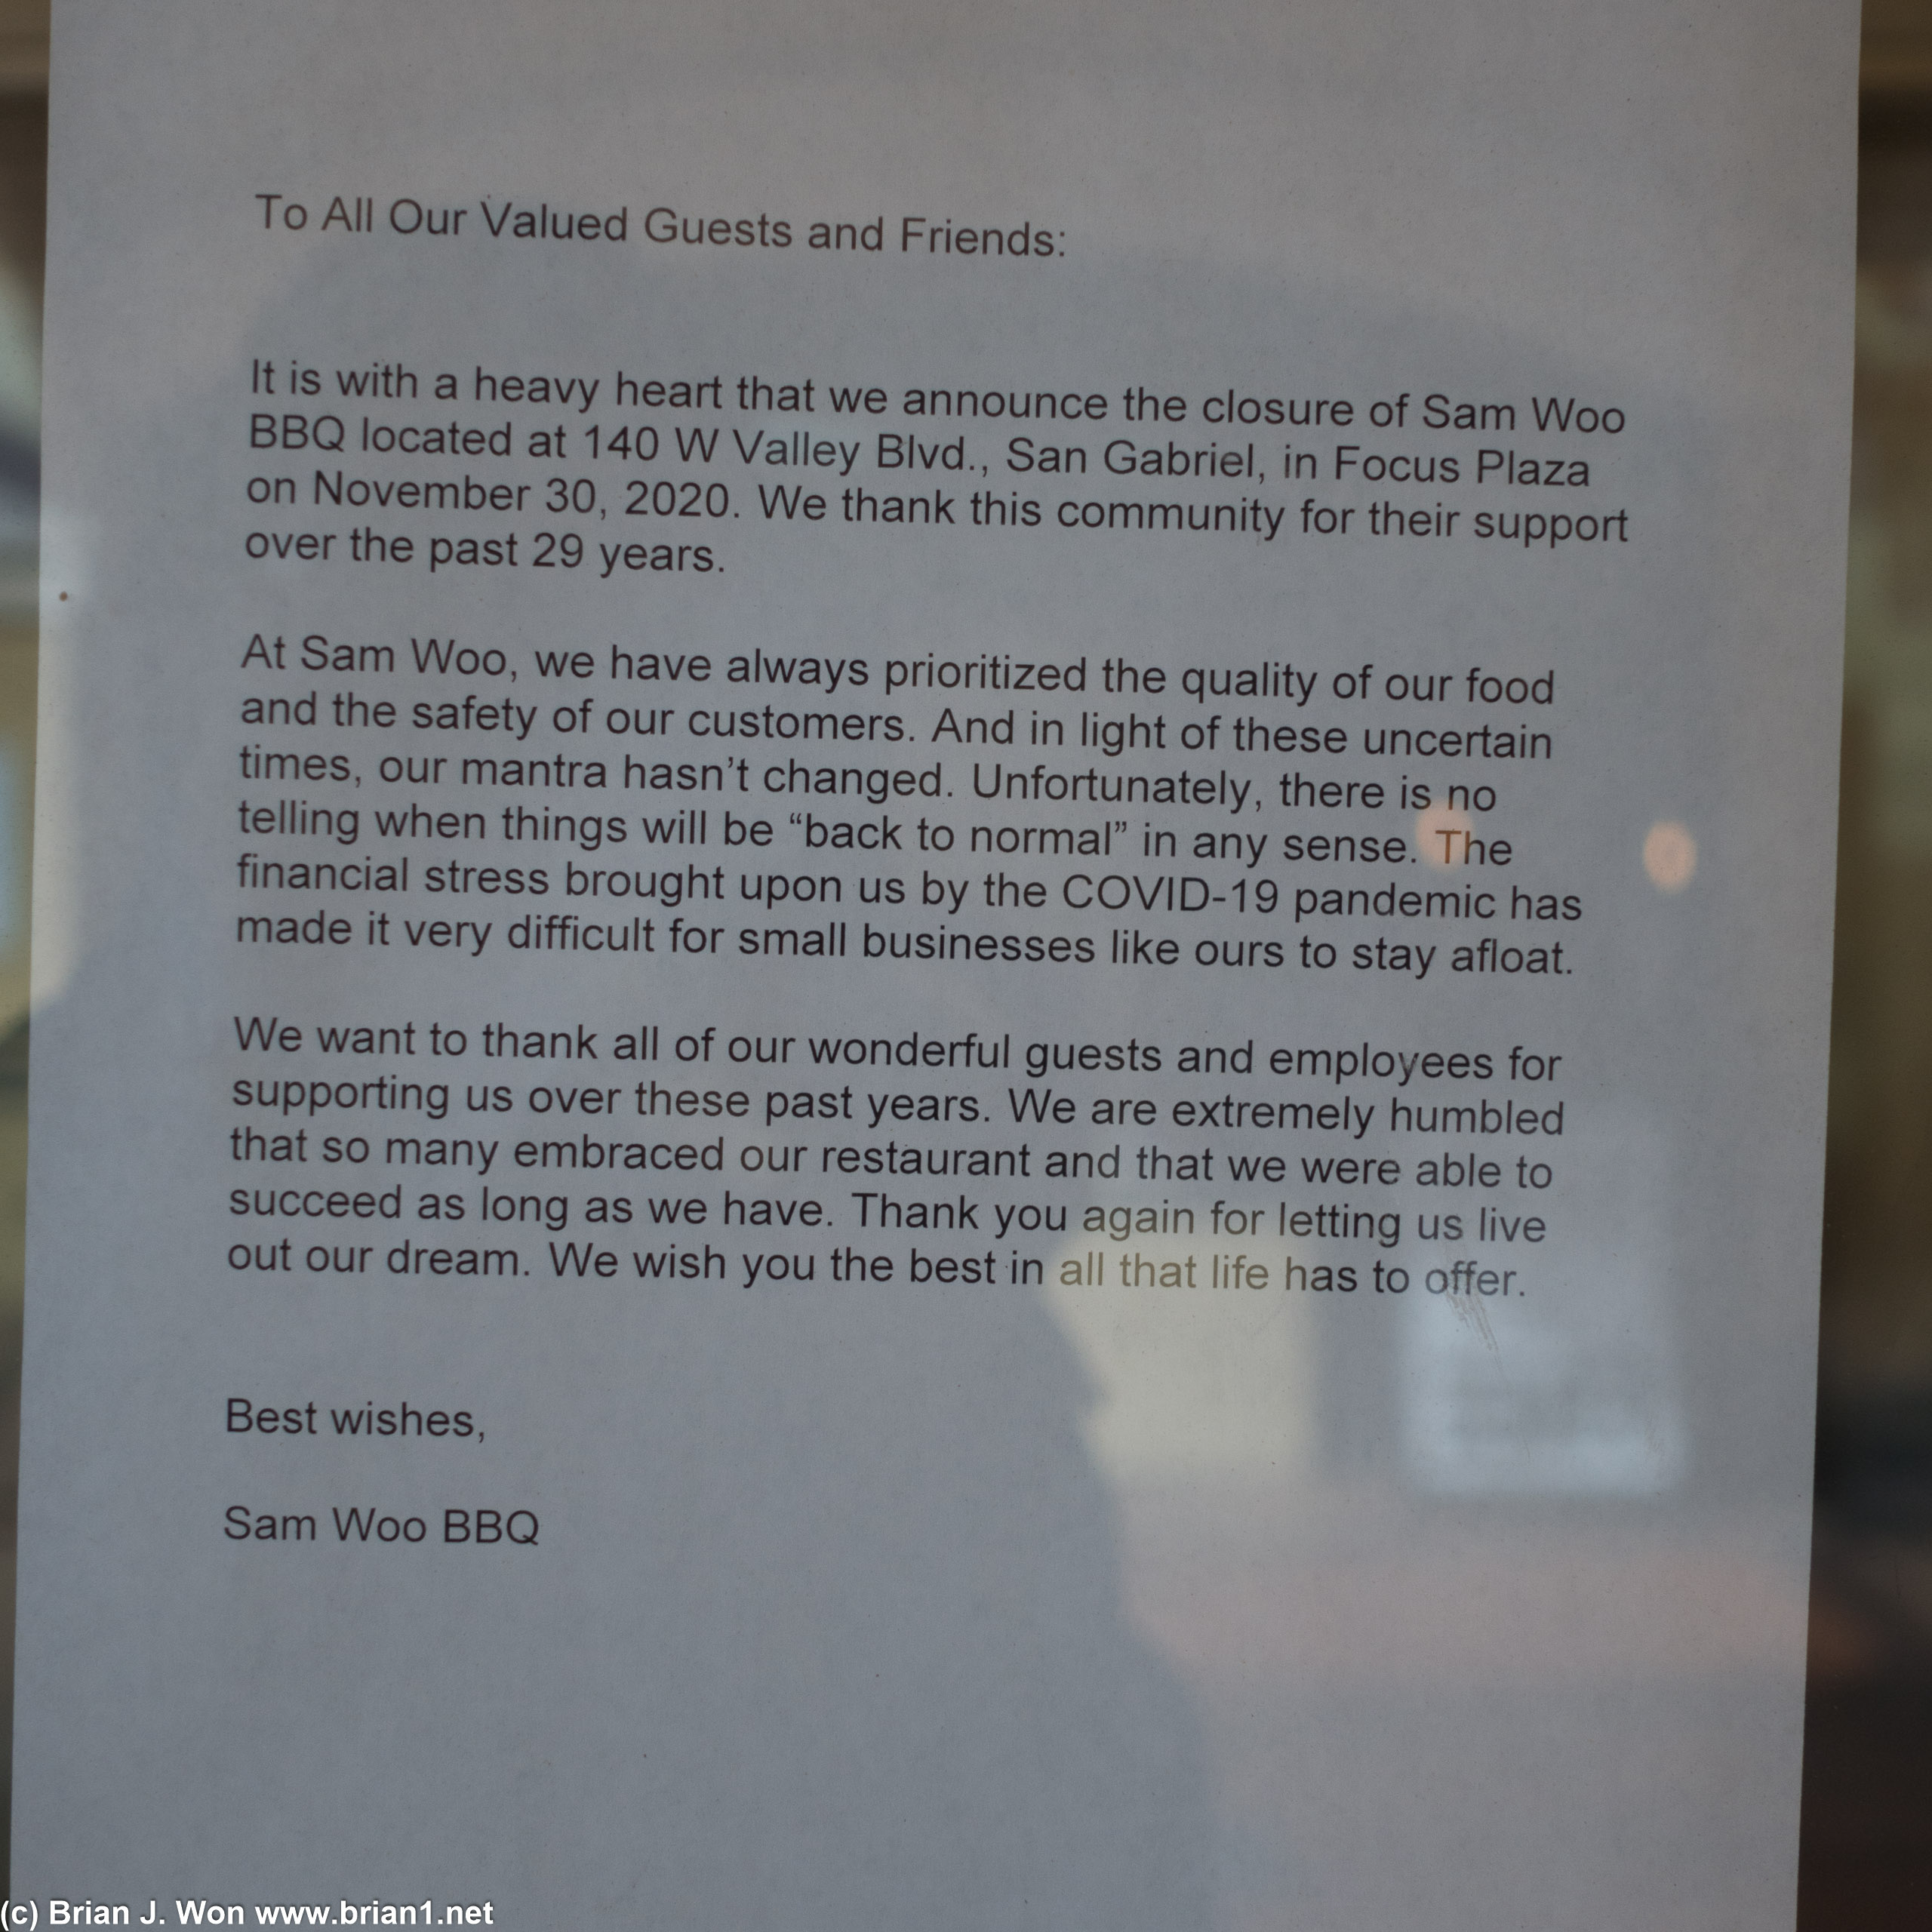 Sam Woo BBQ in Focus Plaza is closed. ;_;